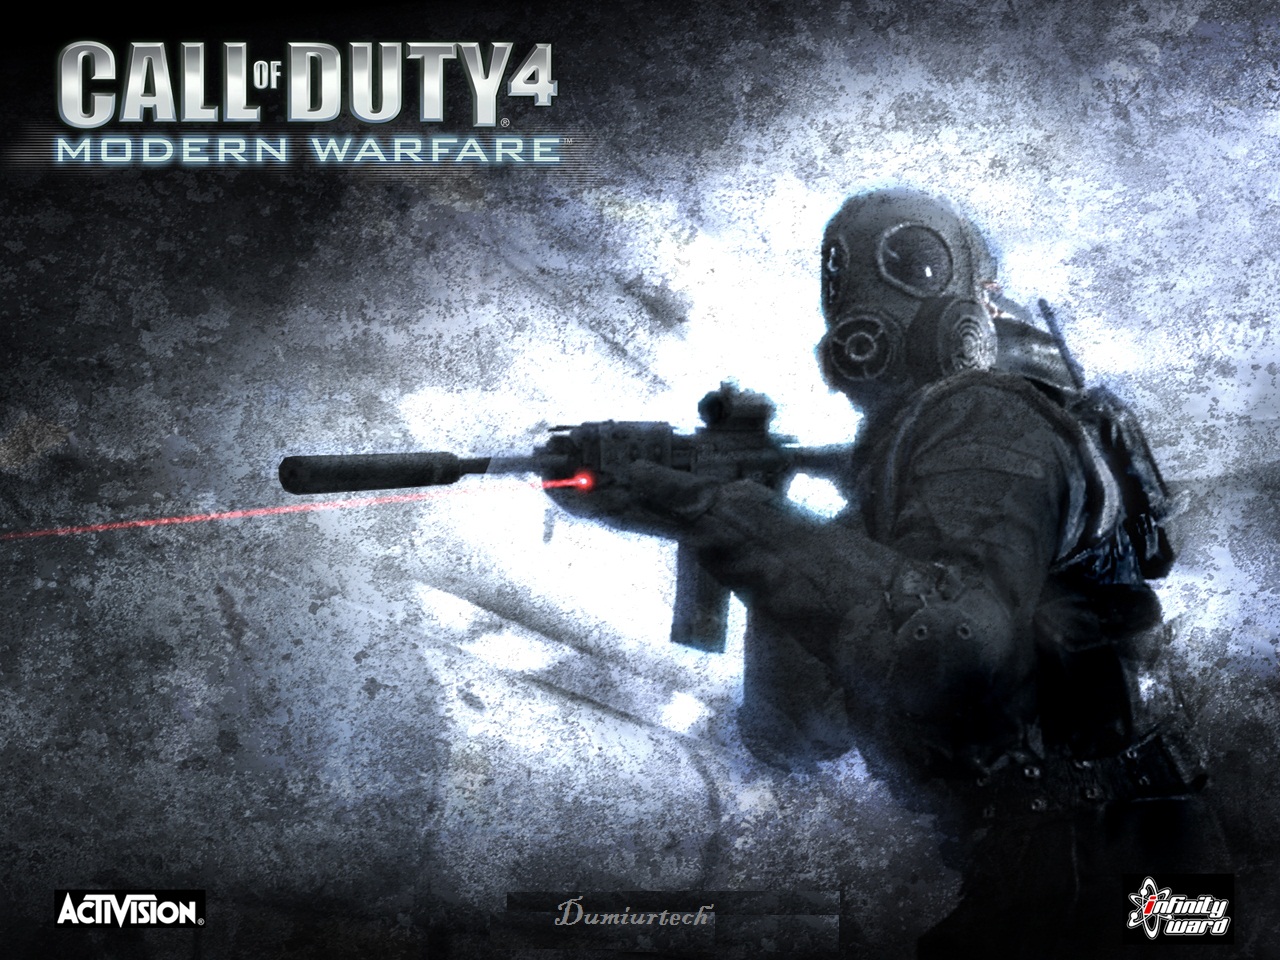 Download Them COD4 1.6 PATCH DOWNLOAD